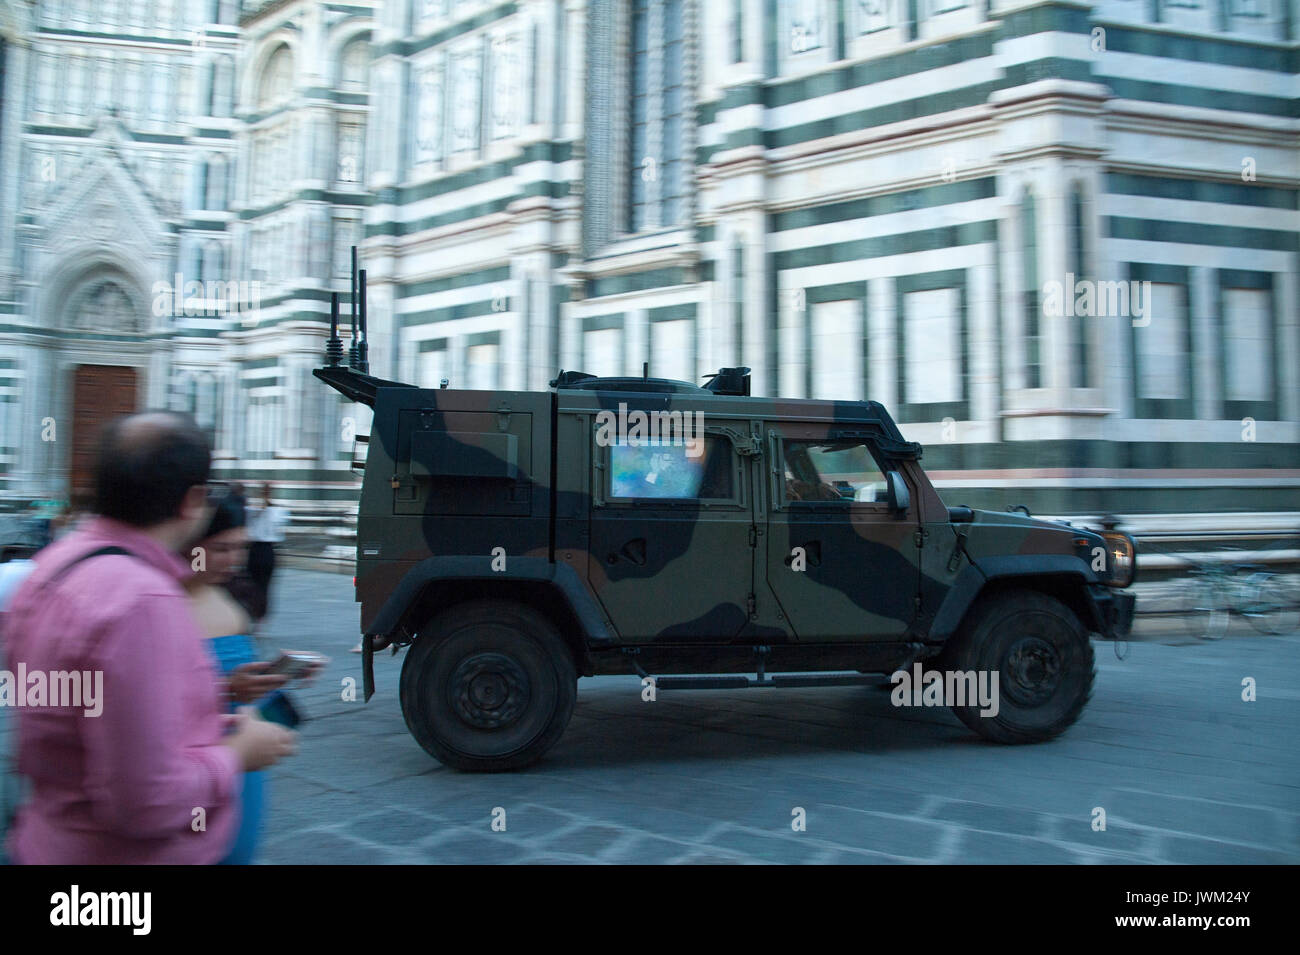 Military car Iveco LMV of during Operazione Strade Sicure in front of Gothic Cattedrale di Santa Maria del Fiore (Cathedral of Saint Mary of the Flowe Stock Photo